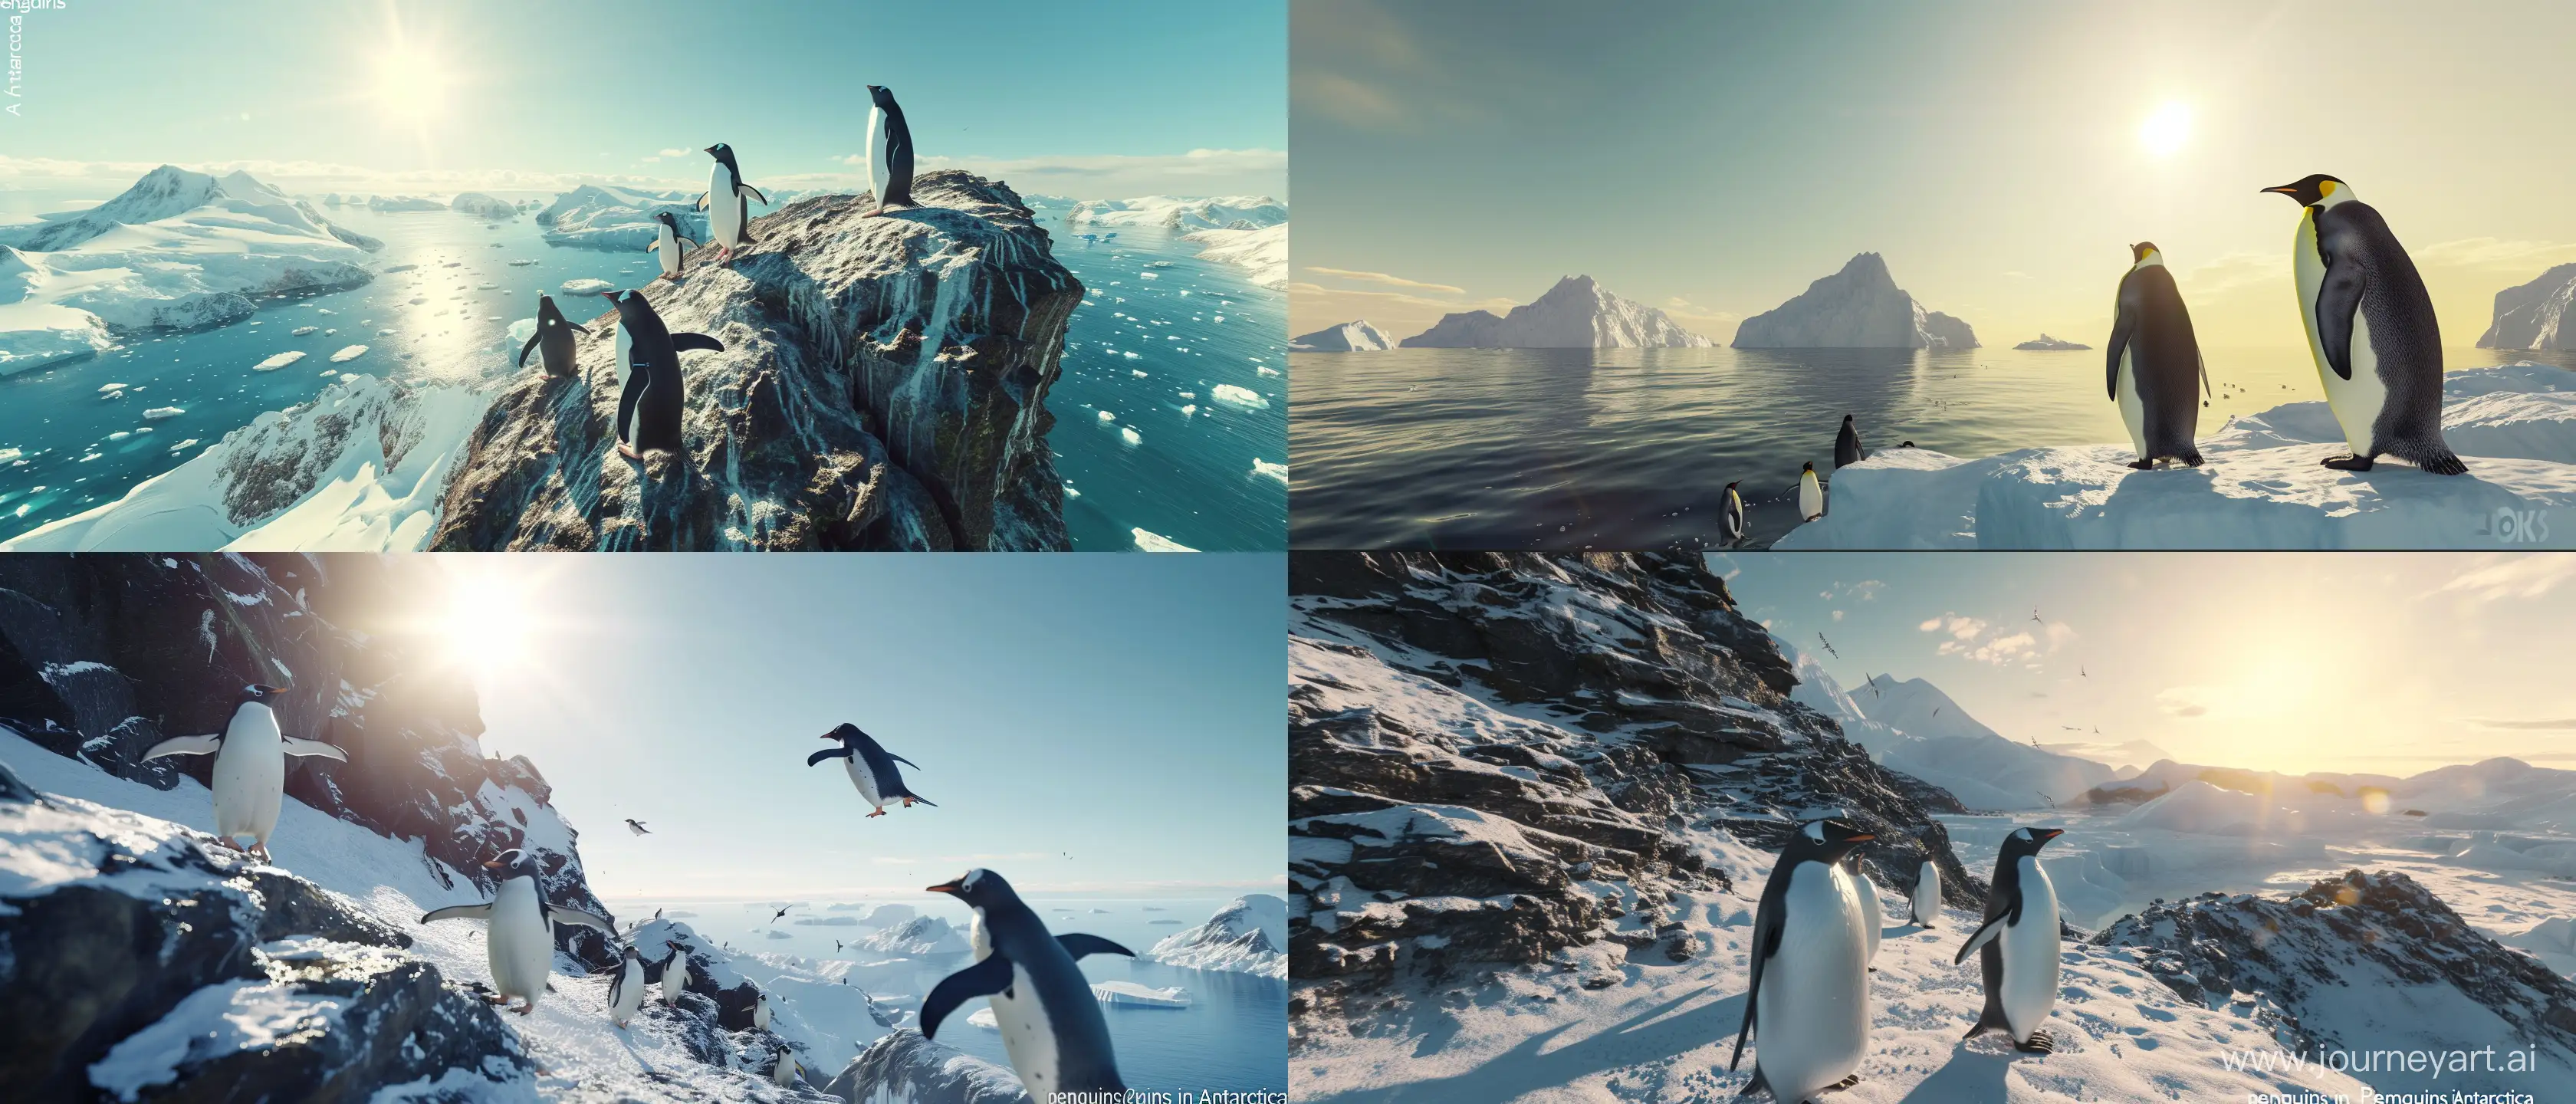 create an image as if it were taken by a drone that is very high from top to bottom in a vertical “penguins in Antarctica” fashion; sunny day; using all the graphic, lighting, design and scenery techniques of the most hyper-realistic and current animations of the last generation; Ray tracing at an absurd level; 32k; better CGI; advanced lighting techniques; cinematic style; all parts of the image must be in the highest possible quality, 32k; --ar 21:9 --v 6.0